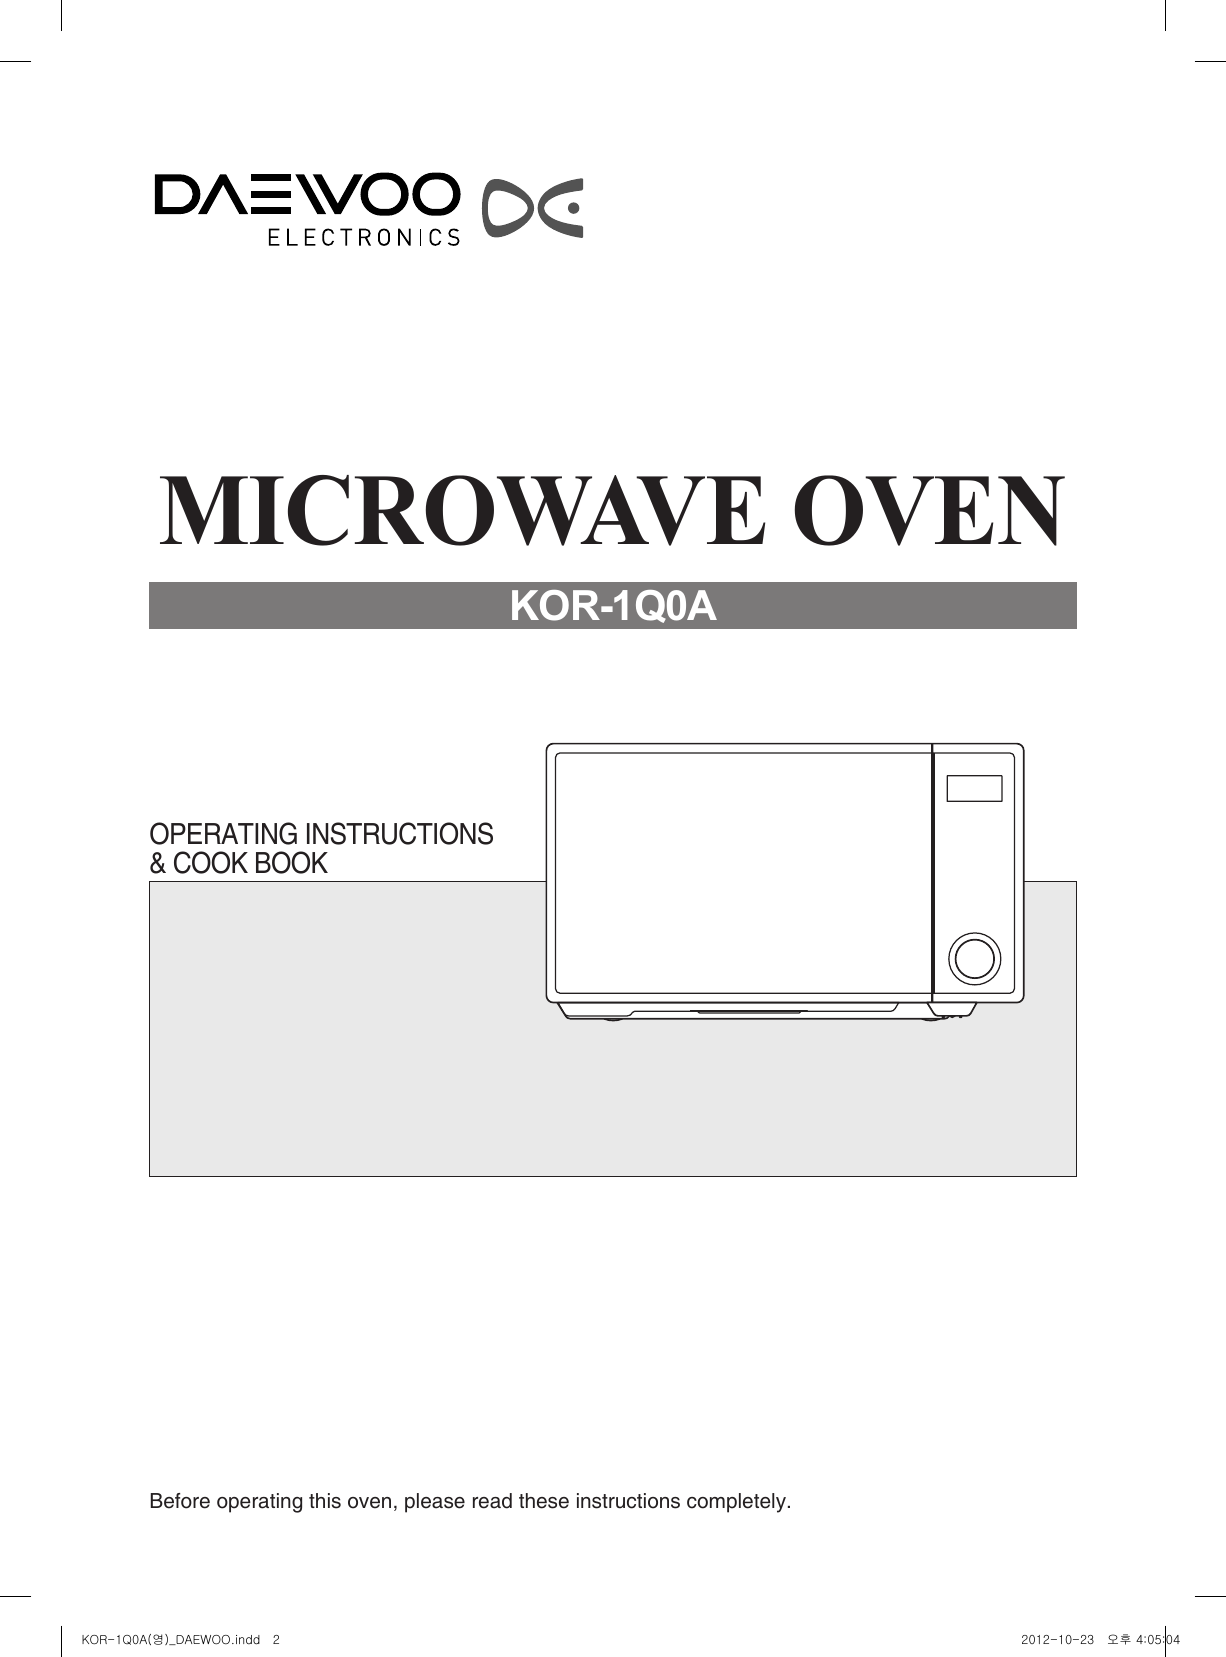 Before operating this oven, please read these instructions completely.OPERATING INSTRUCTIONS&amp; COOK BOOKMICROWAVE OVENKOR-1Q0AKOR-1Q0A(영)_DAEWOO.indd   2 2012-10-23   오후 4:05:04